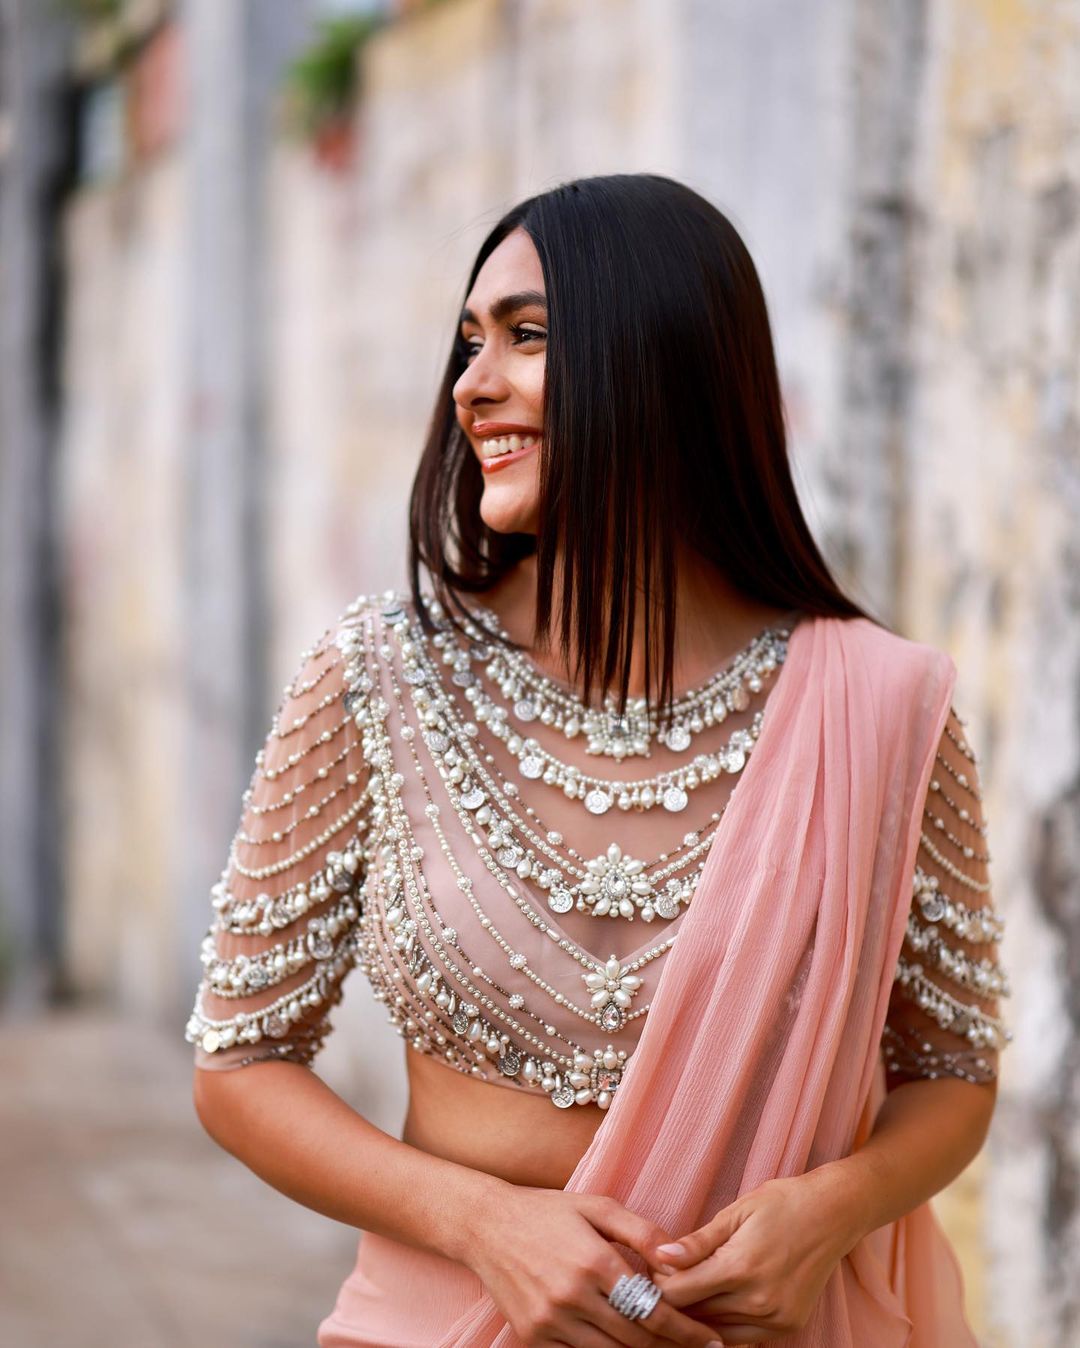 Celebrity-Inspired Risqué Blouse Designs to Consider This Wedding Season |  Femina.in